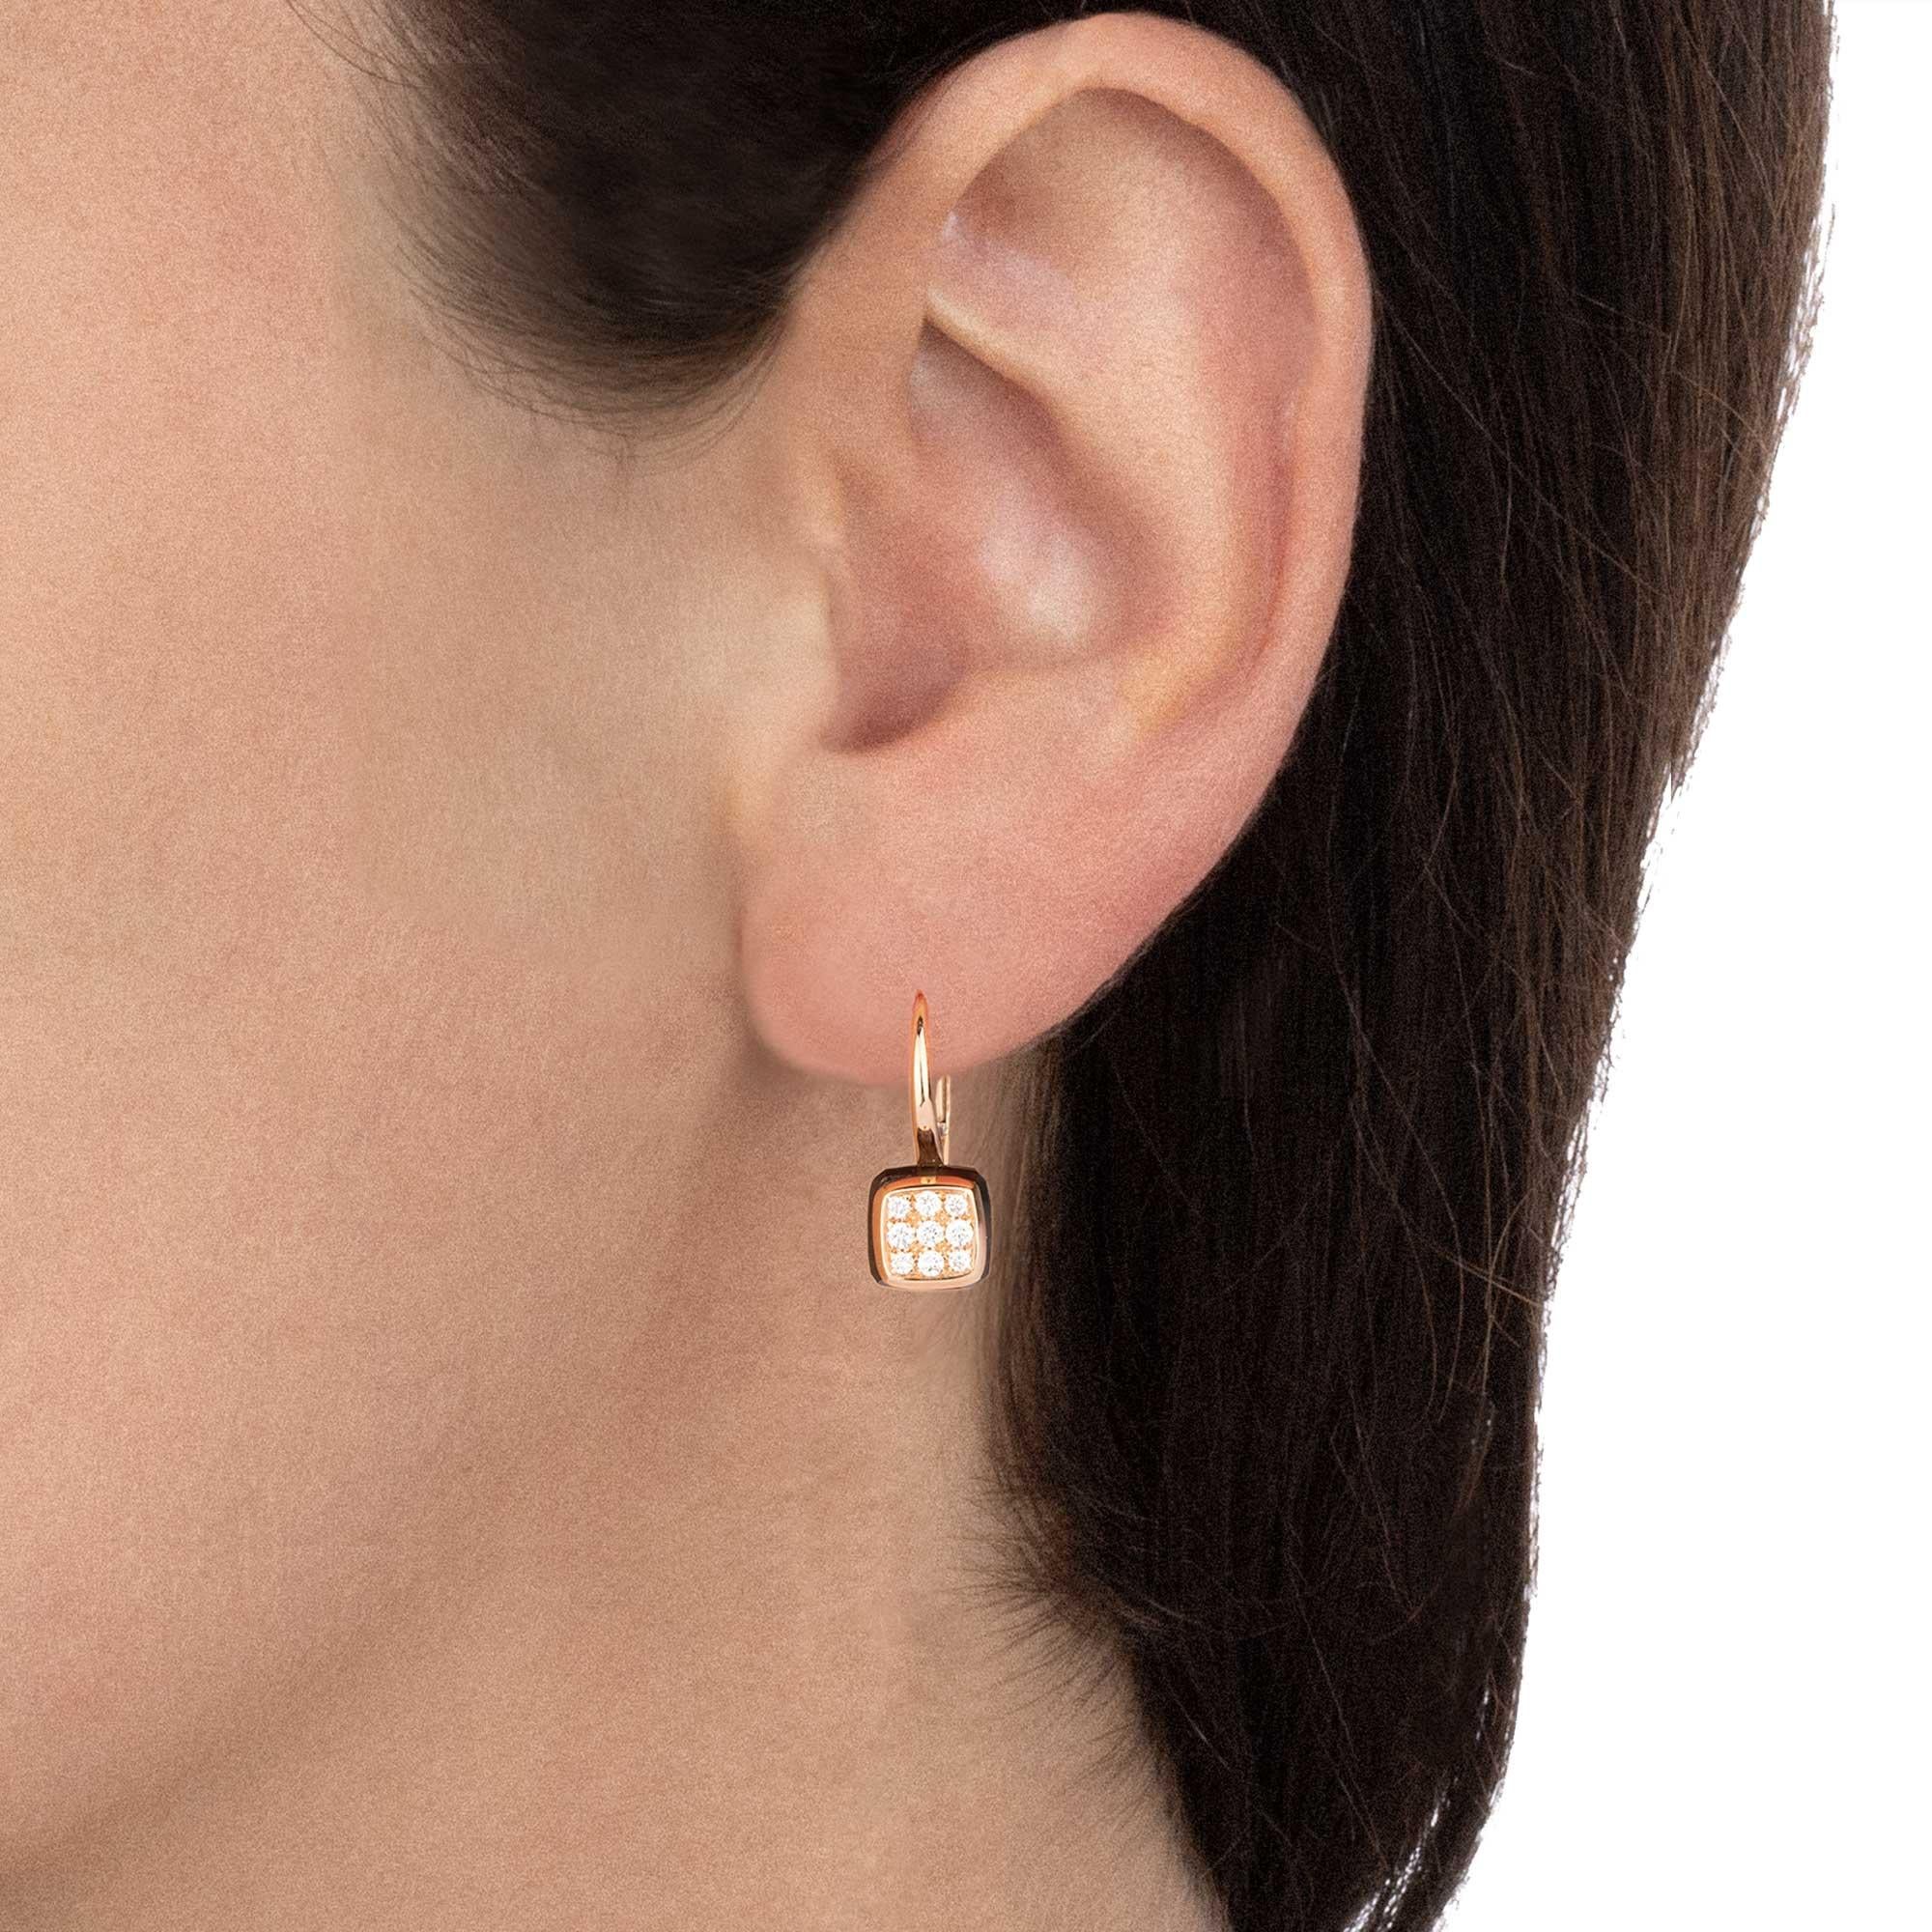 The central element of this jewel are the smoky quartz cushions that welcome and elevate a surface of shining diamonds. The rose gold enhances the chromatic contrasts for a fresh and modern design.

Cast polish rose gold earrings, cushion cut smoky